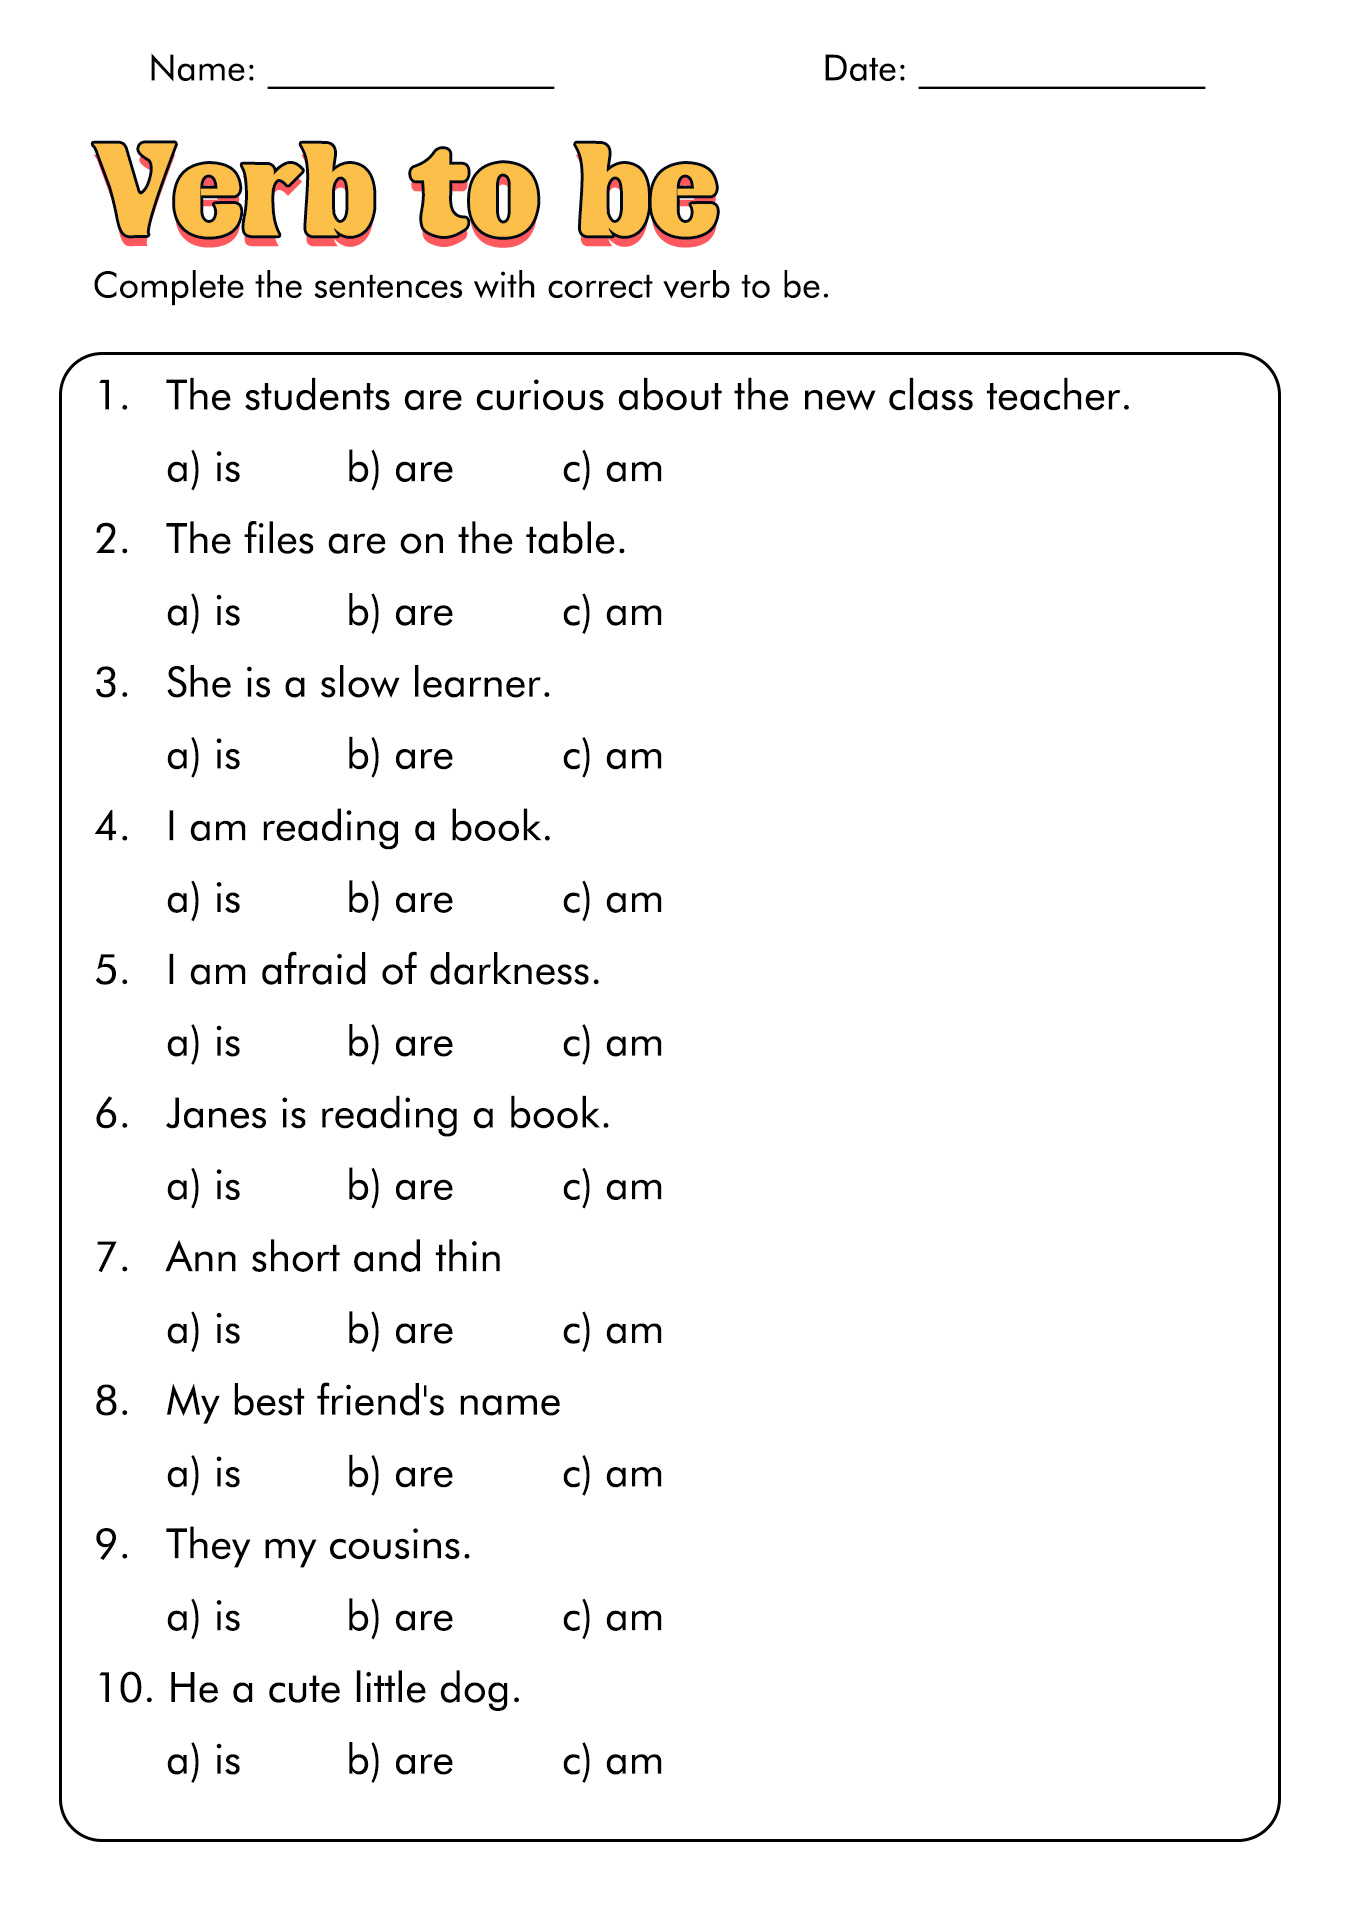 17-best-images-of-comma-practice-worksheets-comma-splice-practice-worksheet-answers-printable